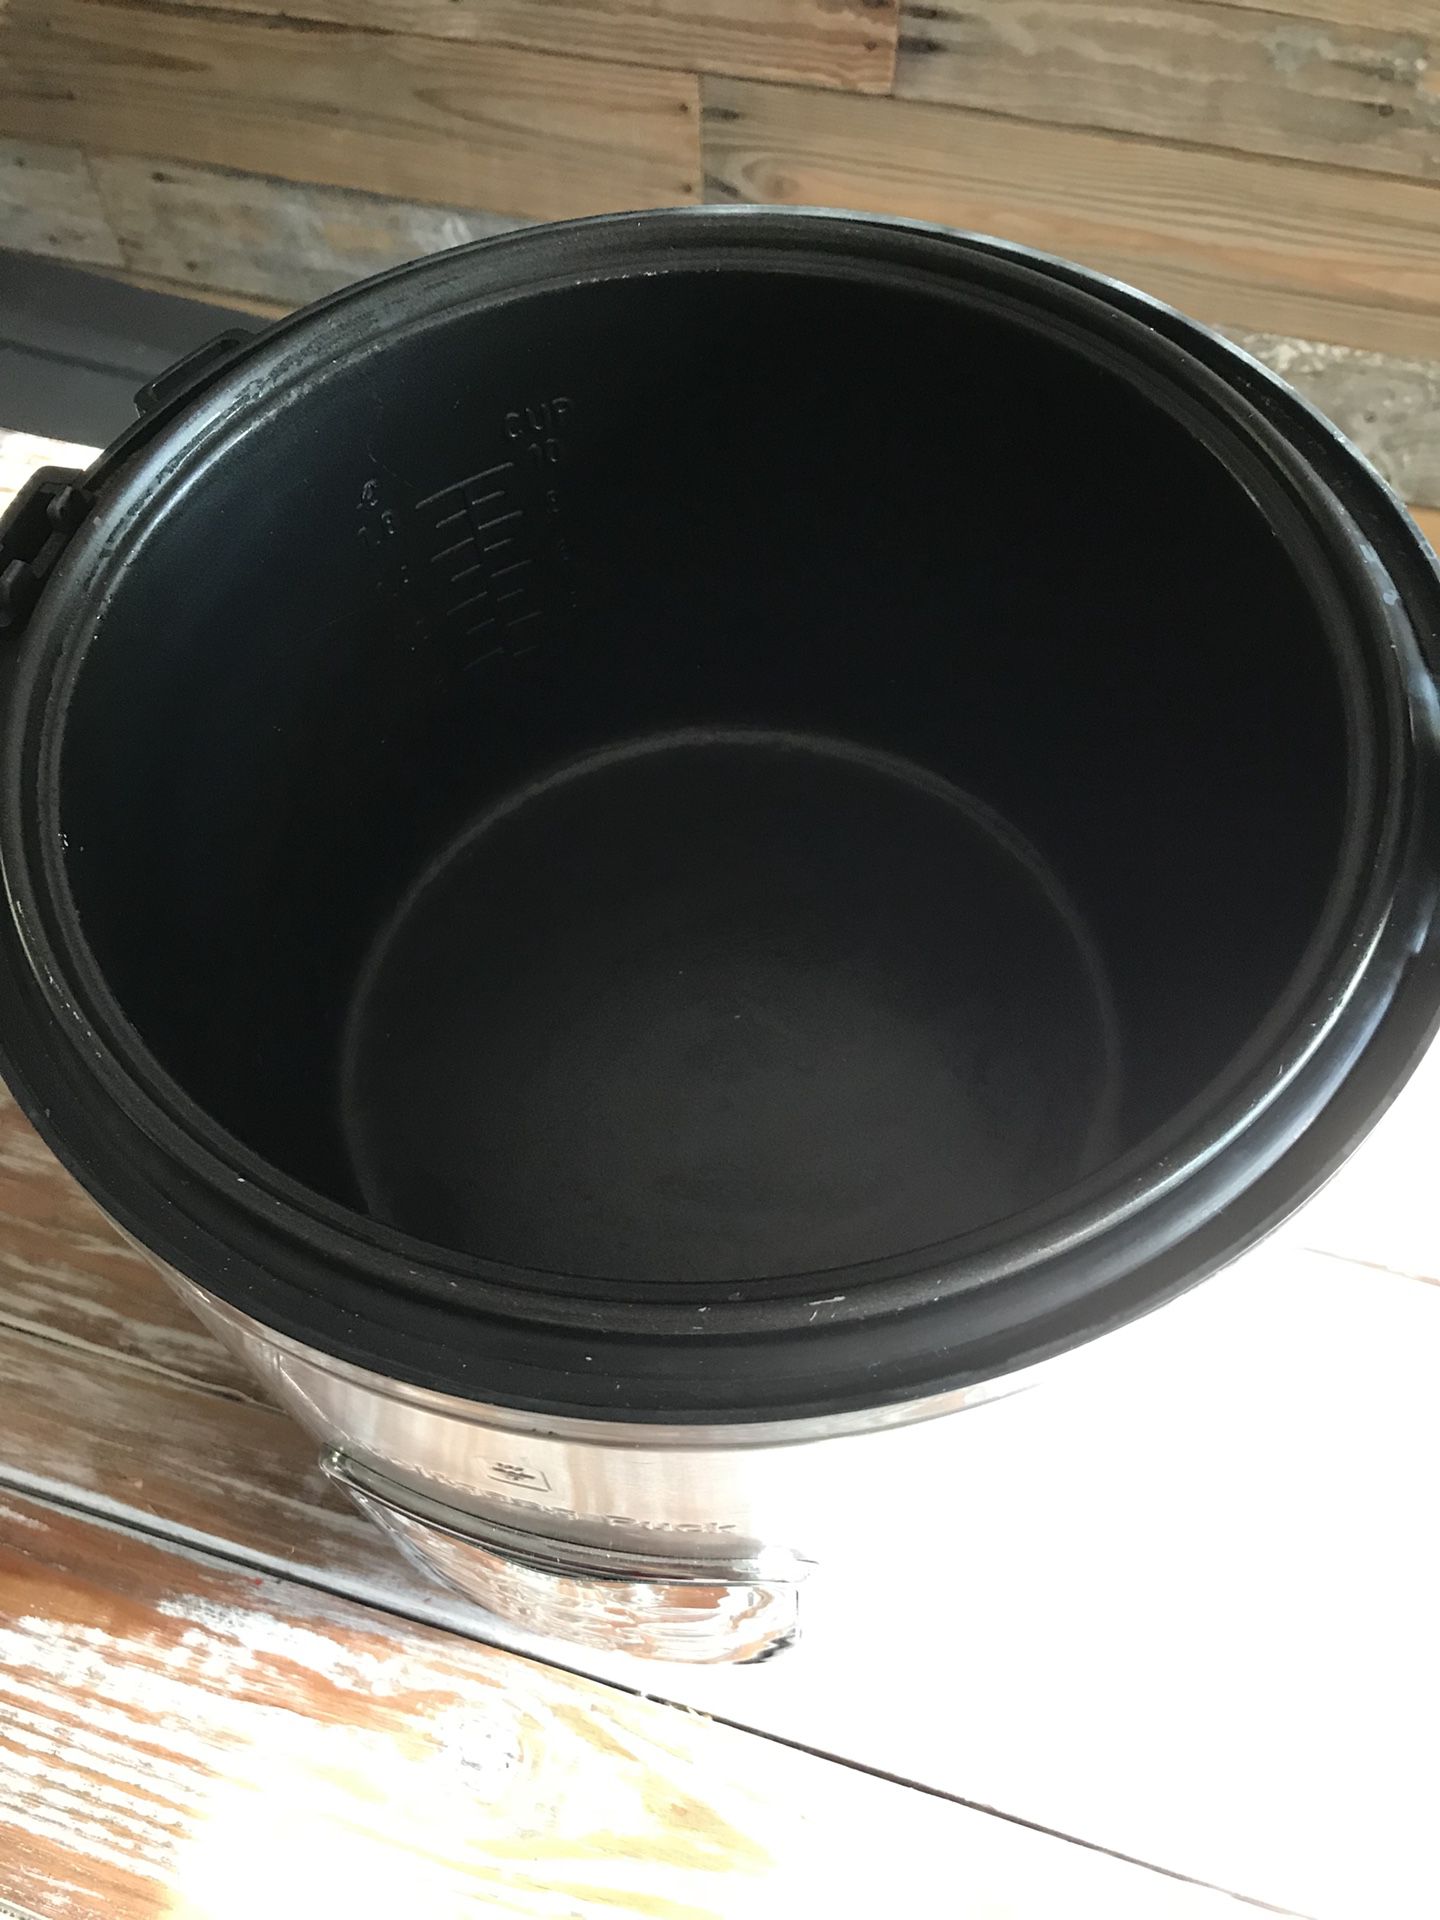 Wolfgang puck rice cooker for Sale in Stuart, FL - OfferUp